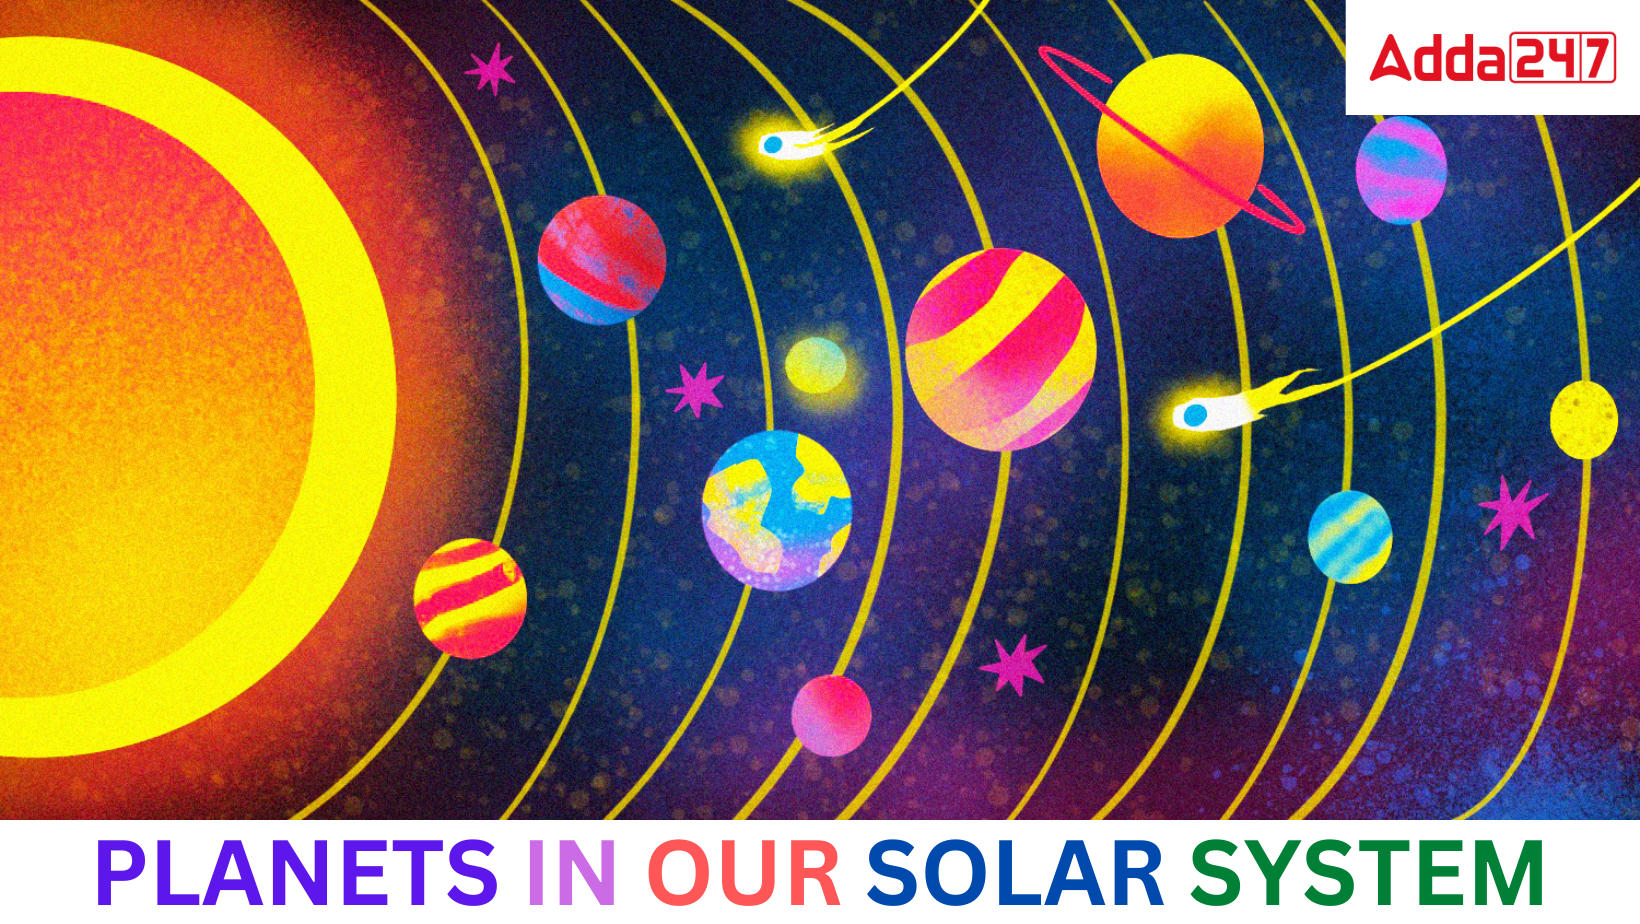 PLANETS IN OUR SOLAR SYSTEM